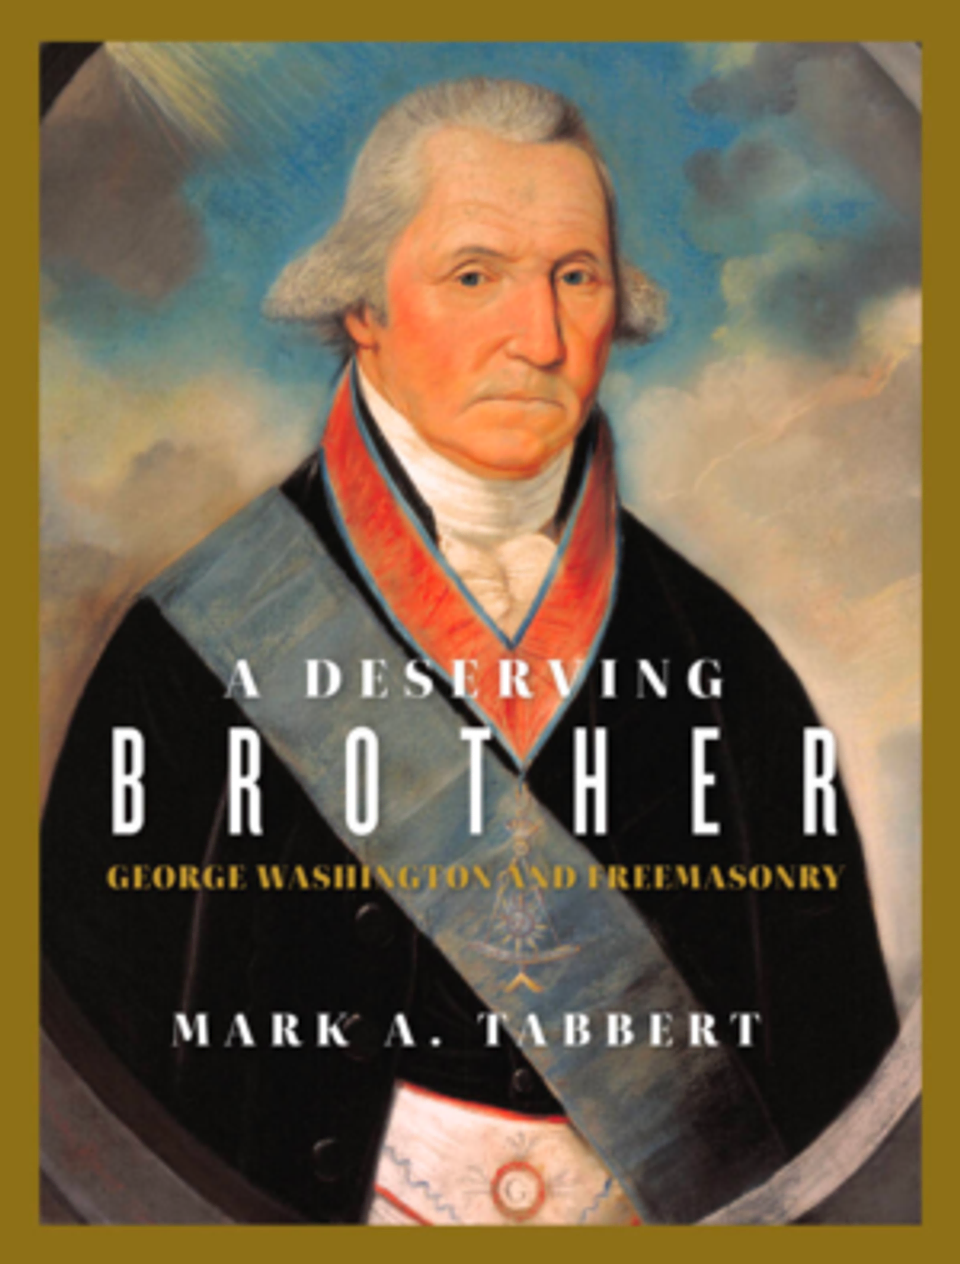 Brother Tabbert’s newest book, A Deserving Brother: George Washington and Freemasonry